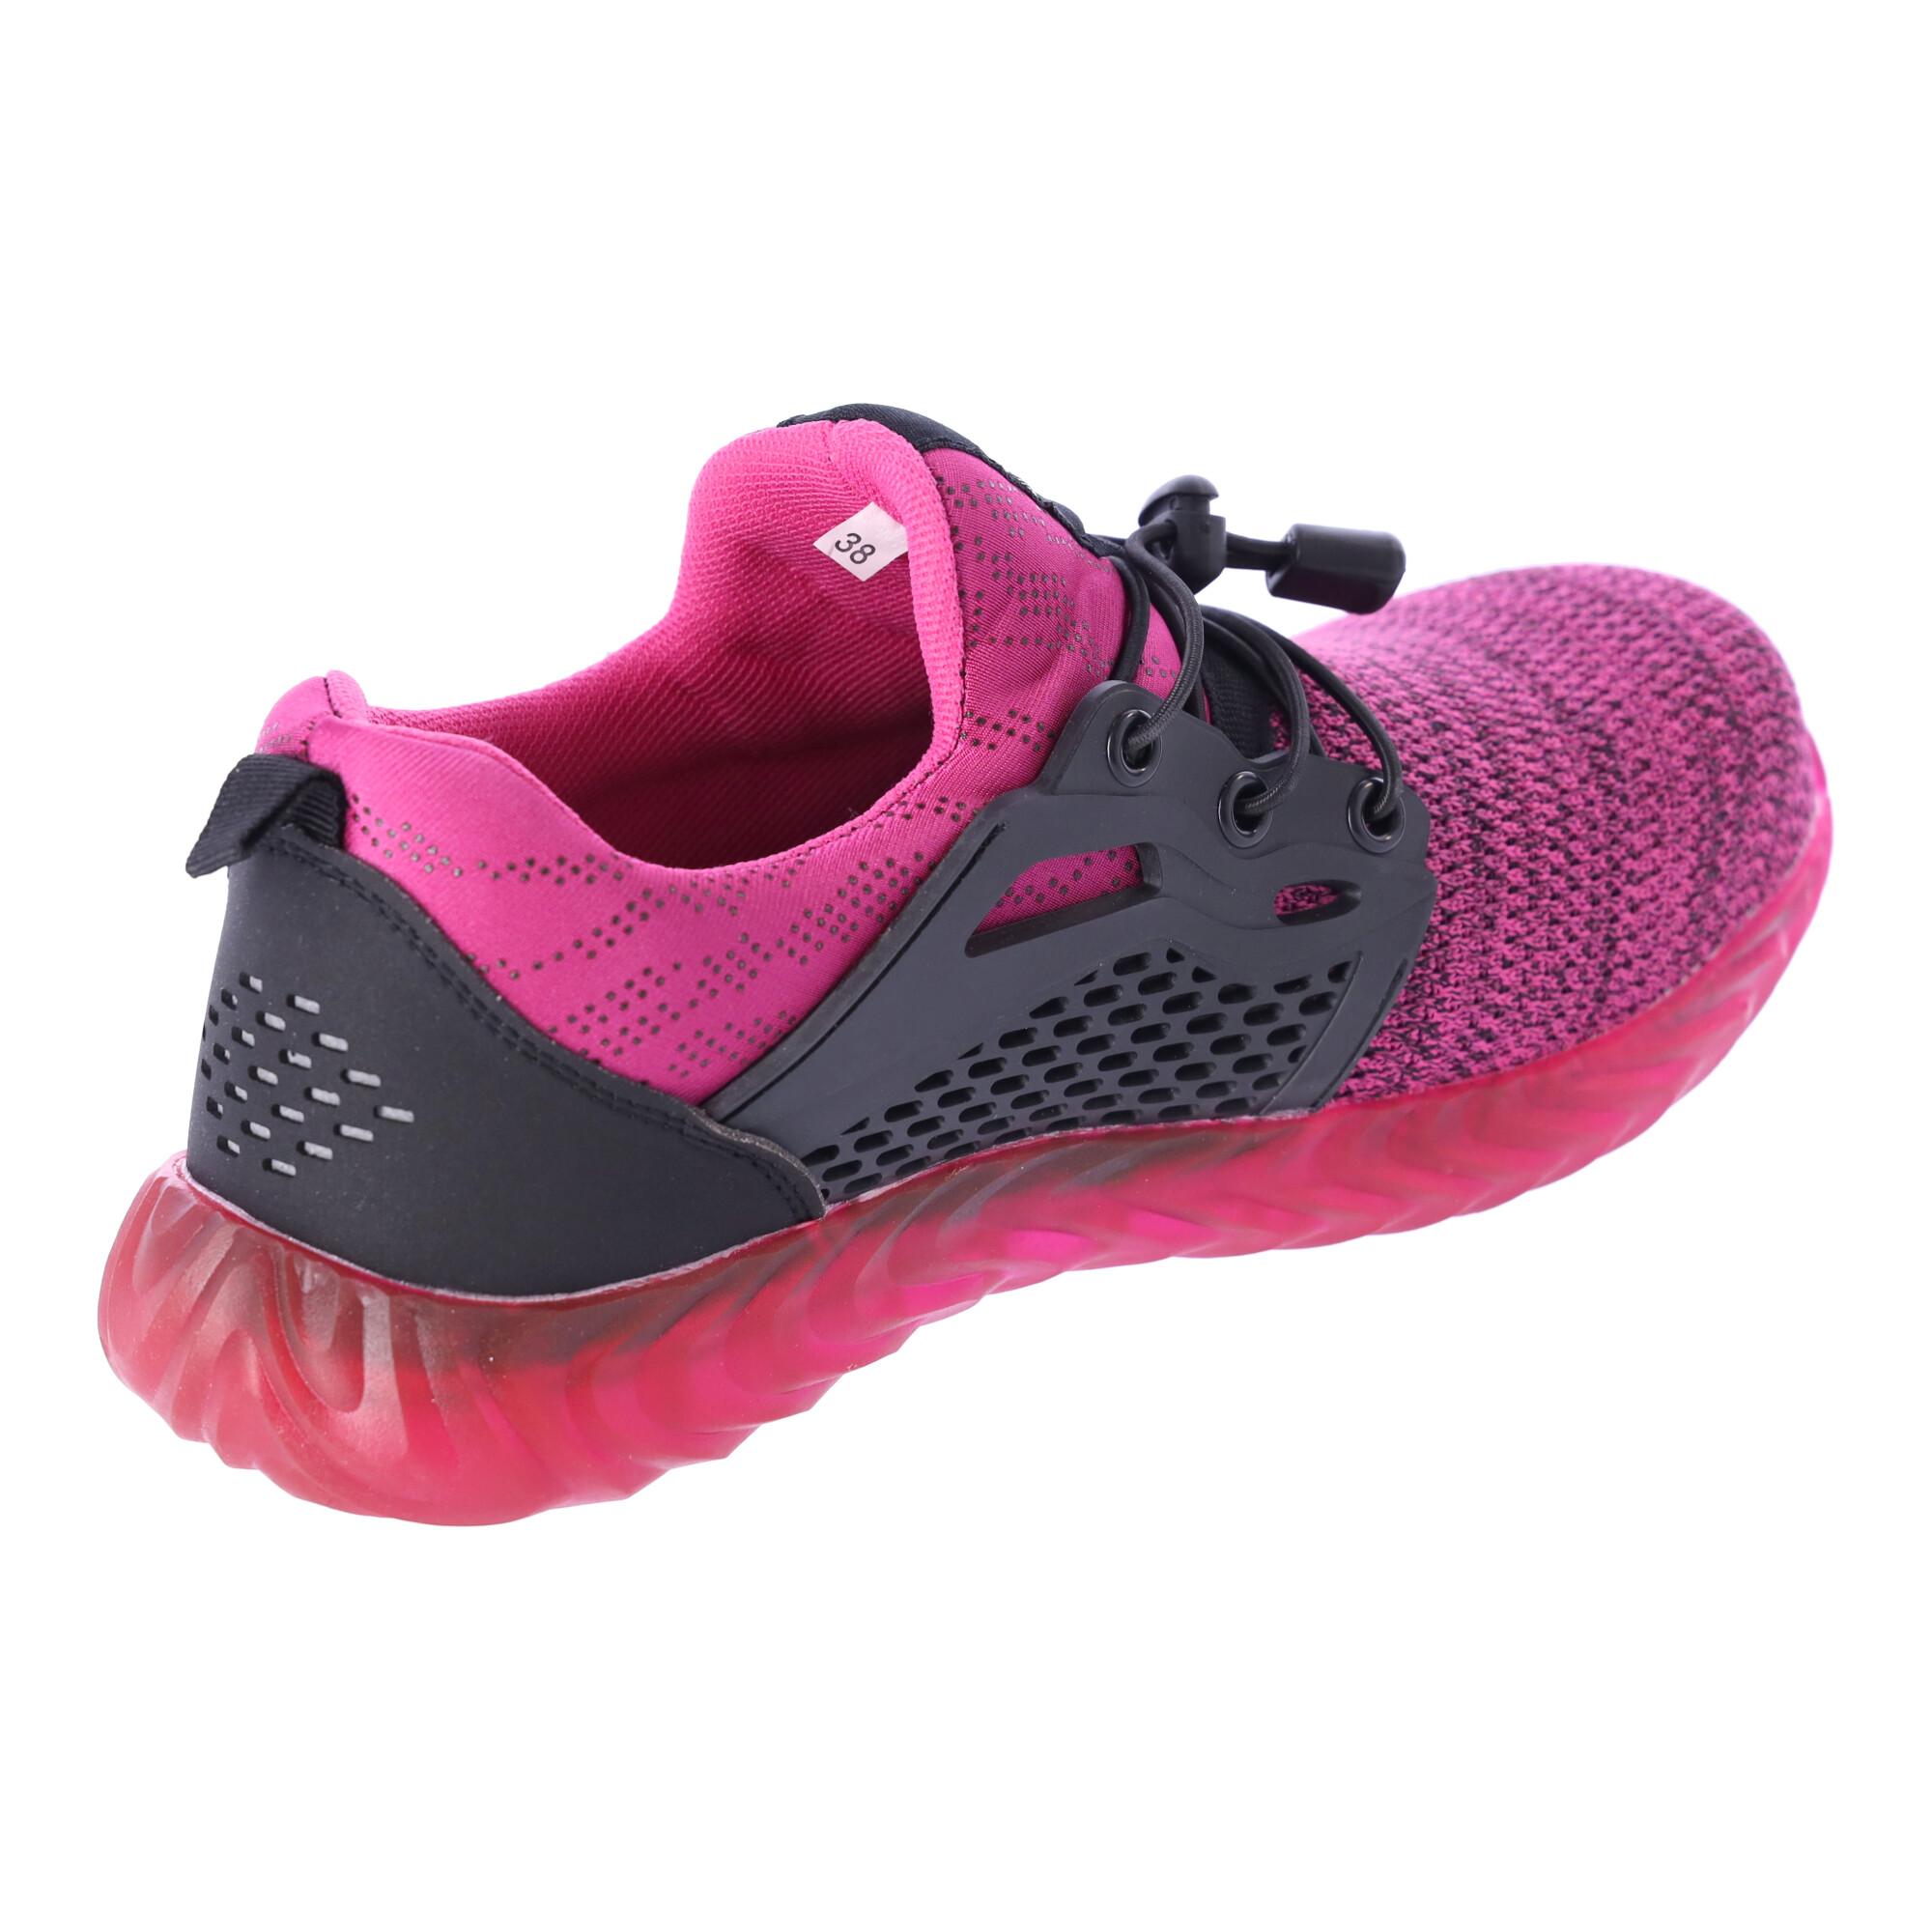 Work safety shoes "39" - pink